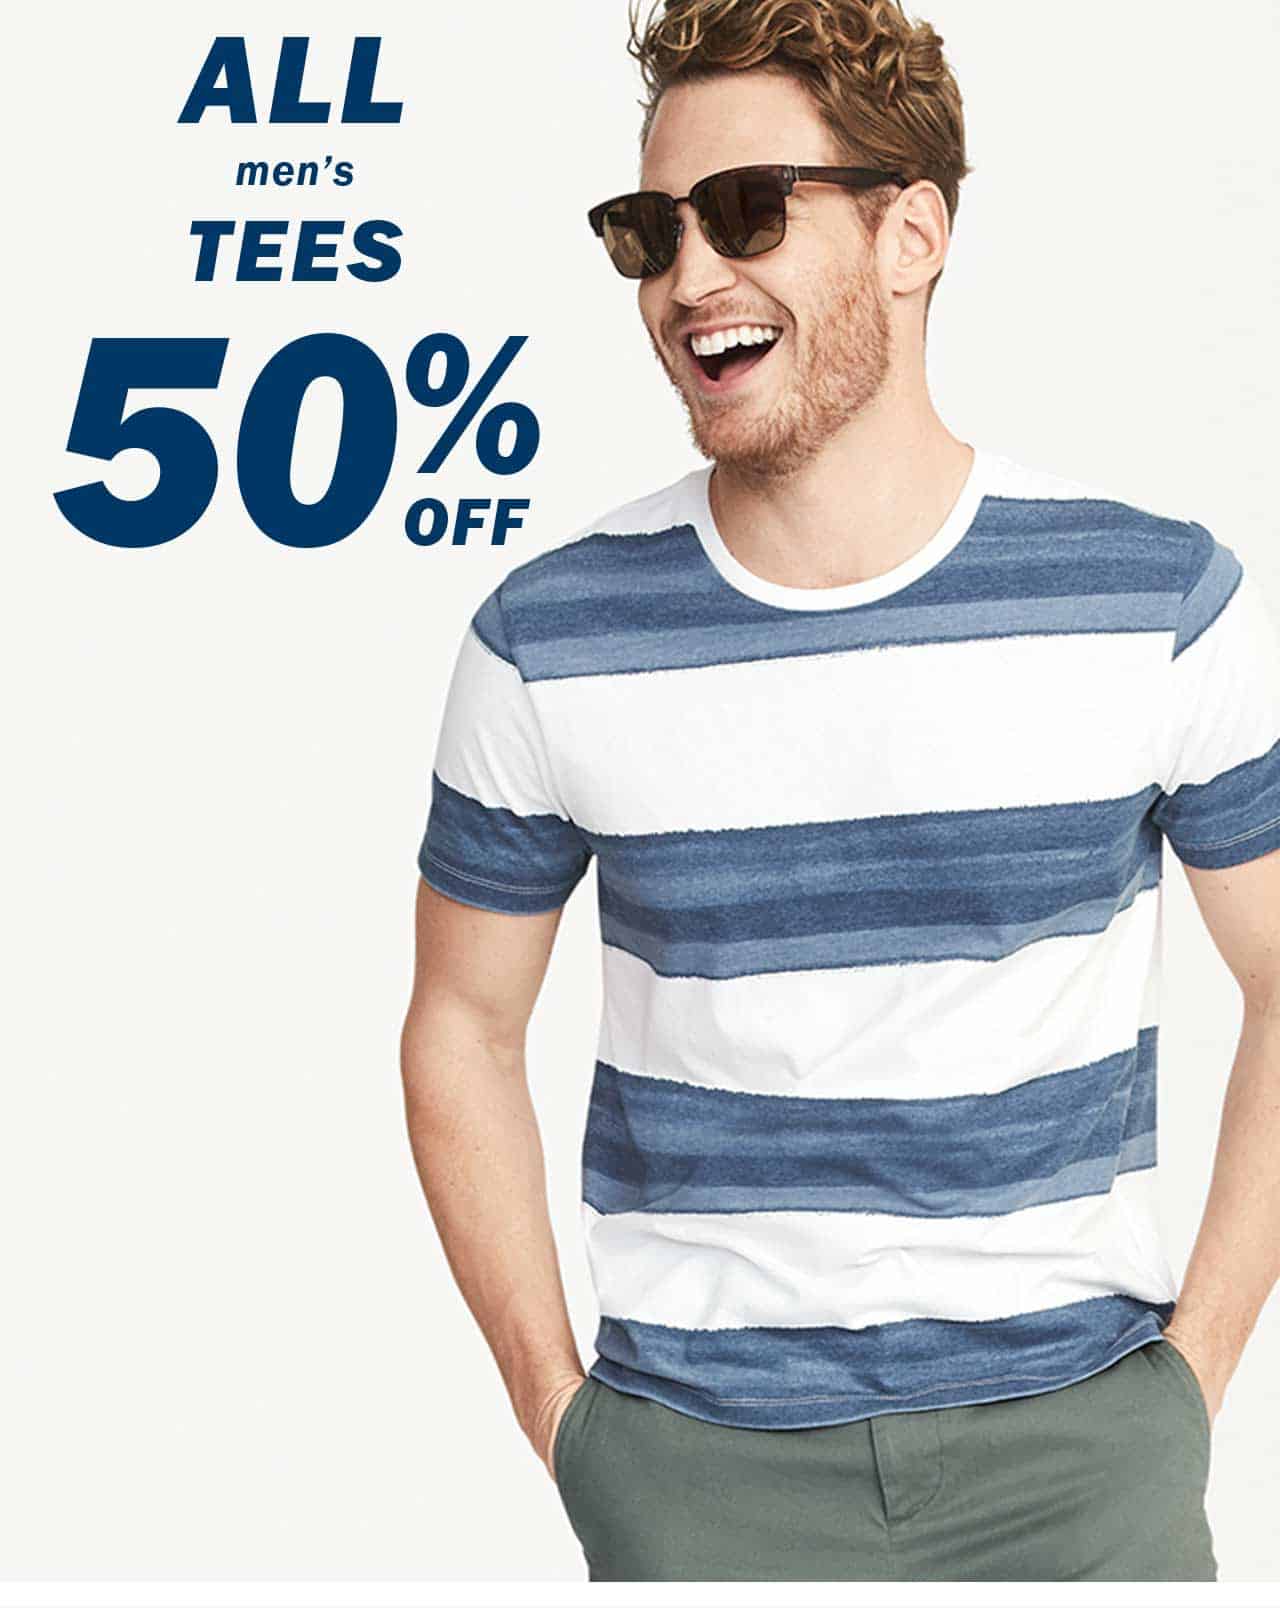 Old Navy Canada: All Men's Tees 50% off (June 15 Only)